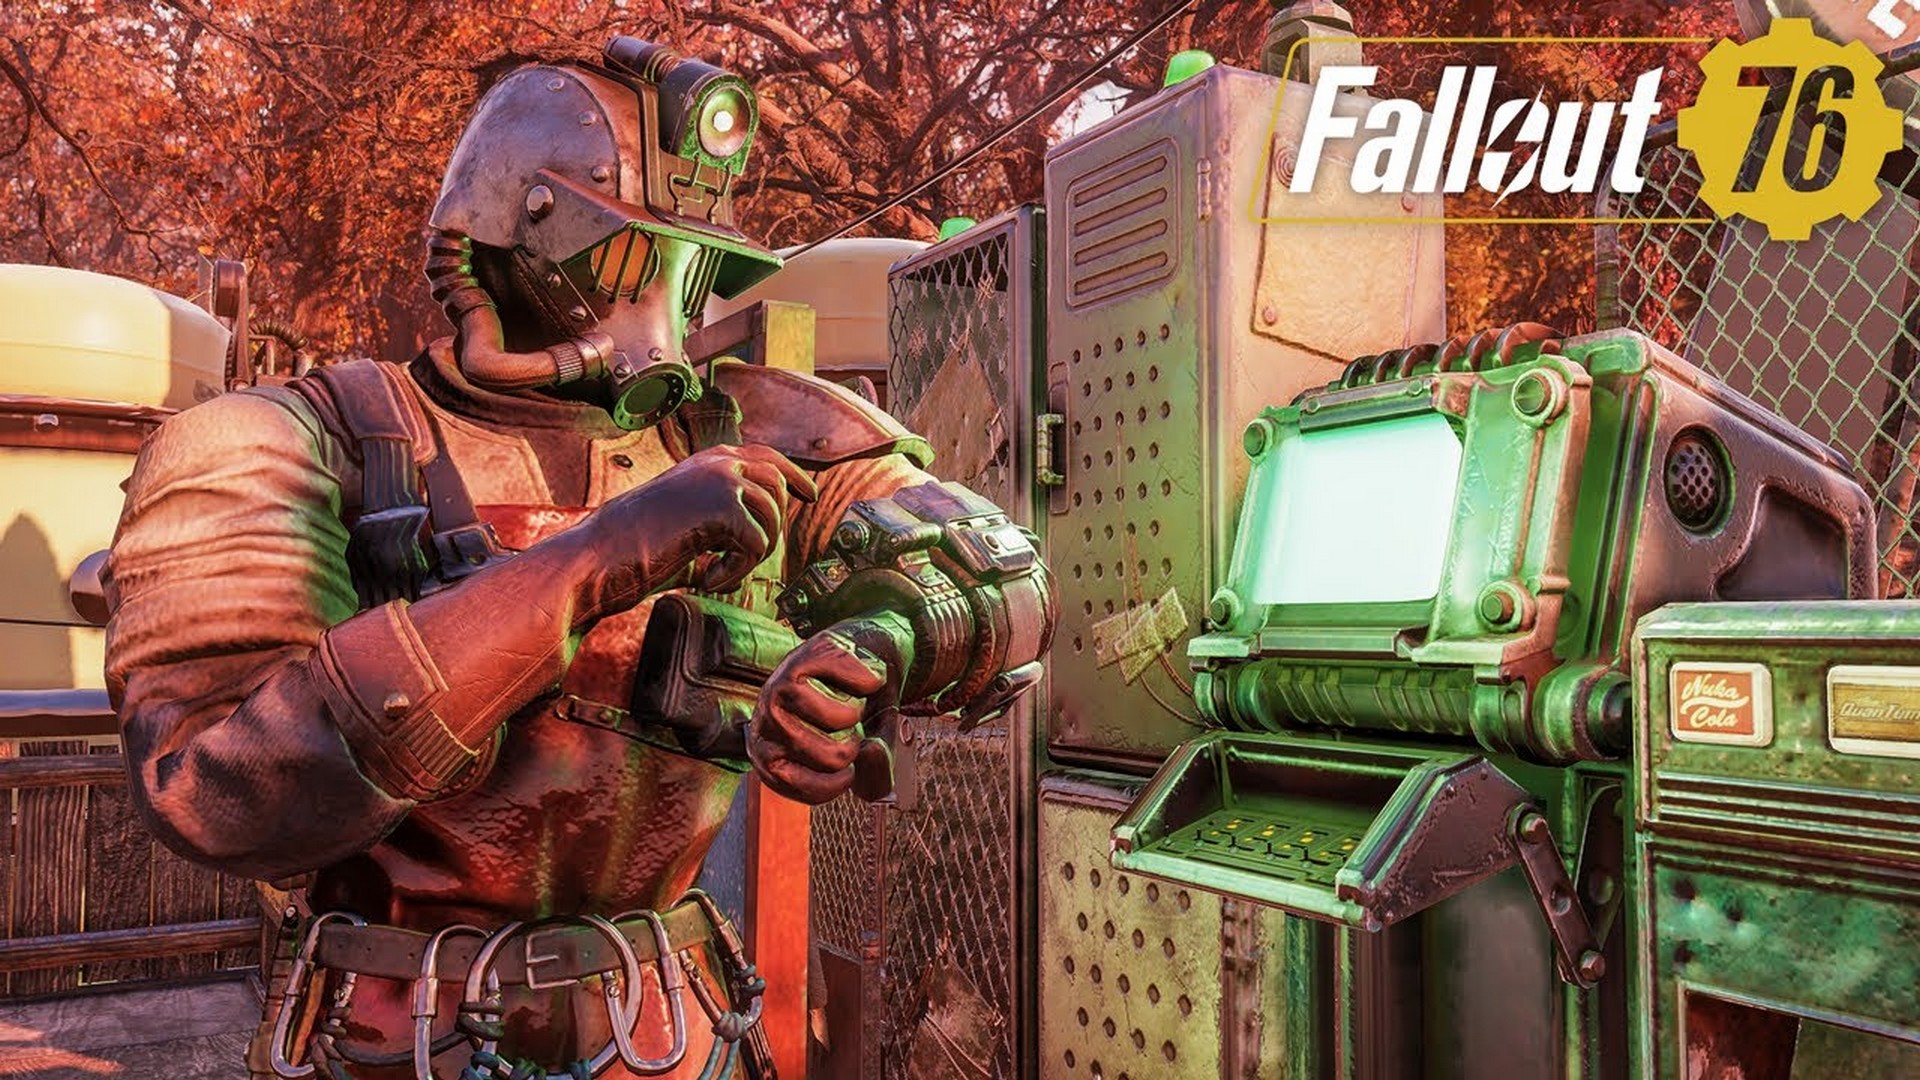 Fallout 76 – The Inventory Update Available Now – Stash Increase, Pip-Boy Updates, Bug Fixes and More